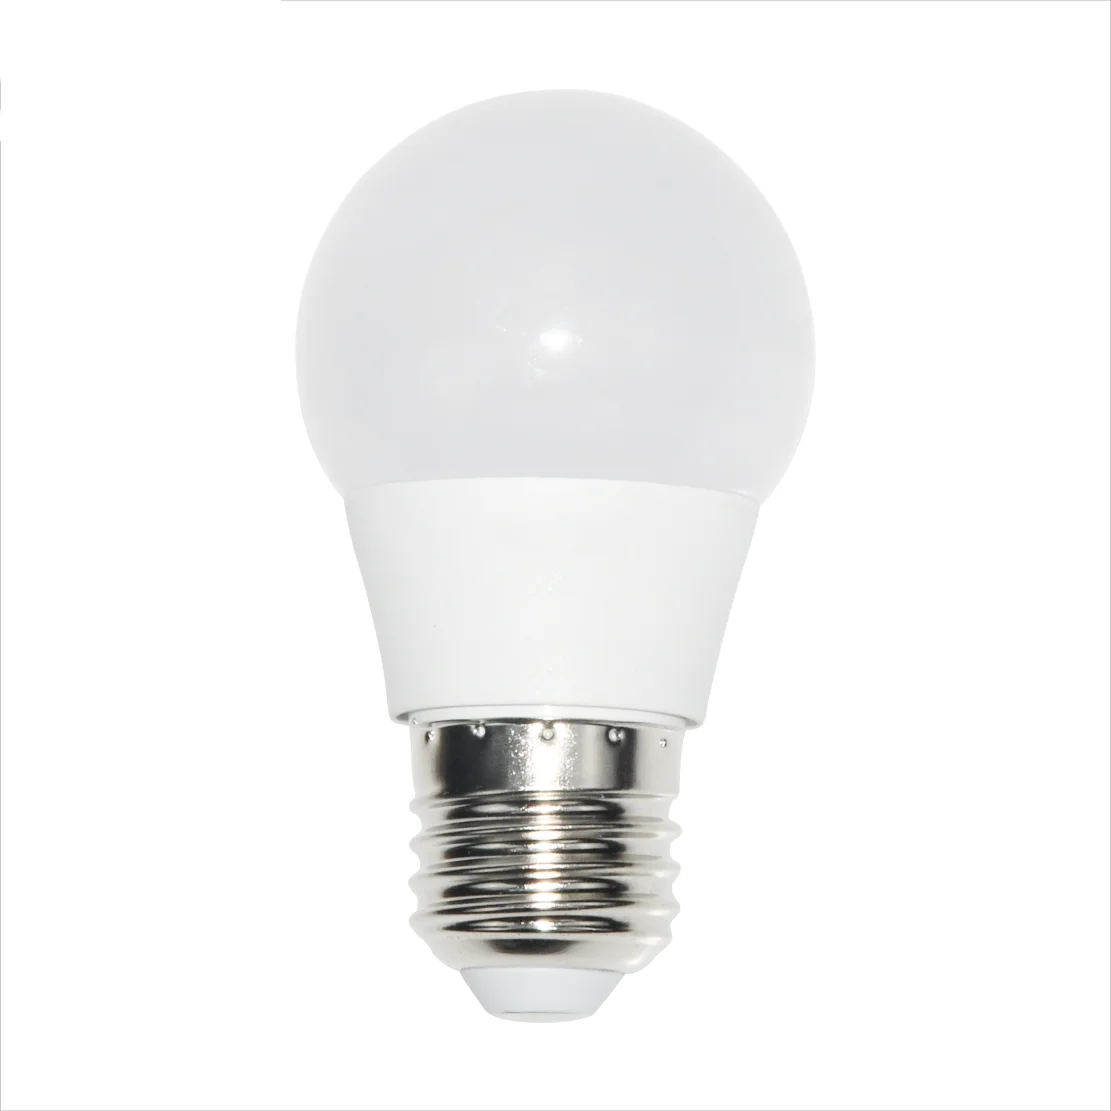 With CCC Certification Low Price E27 B22 Base  Energy Saving Globe A55 5W Residential LED Light Bulb